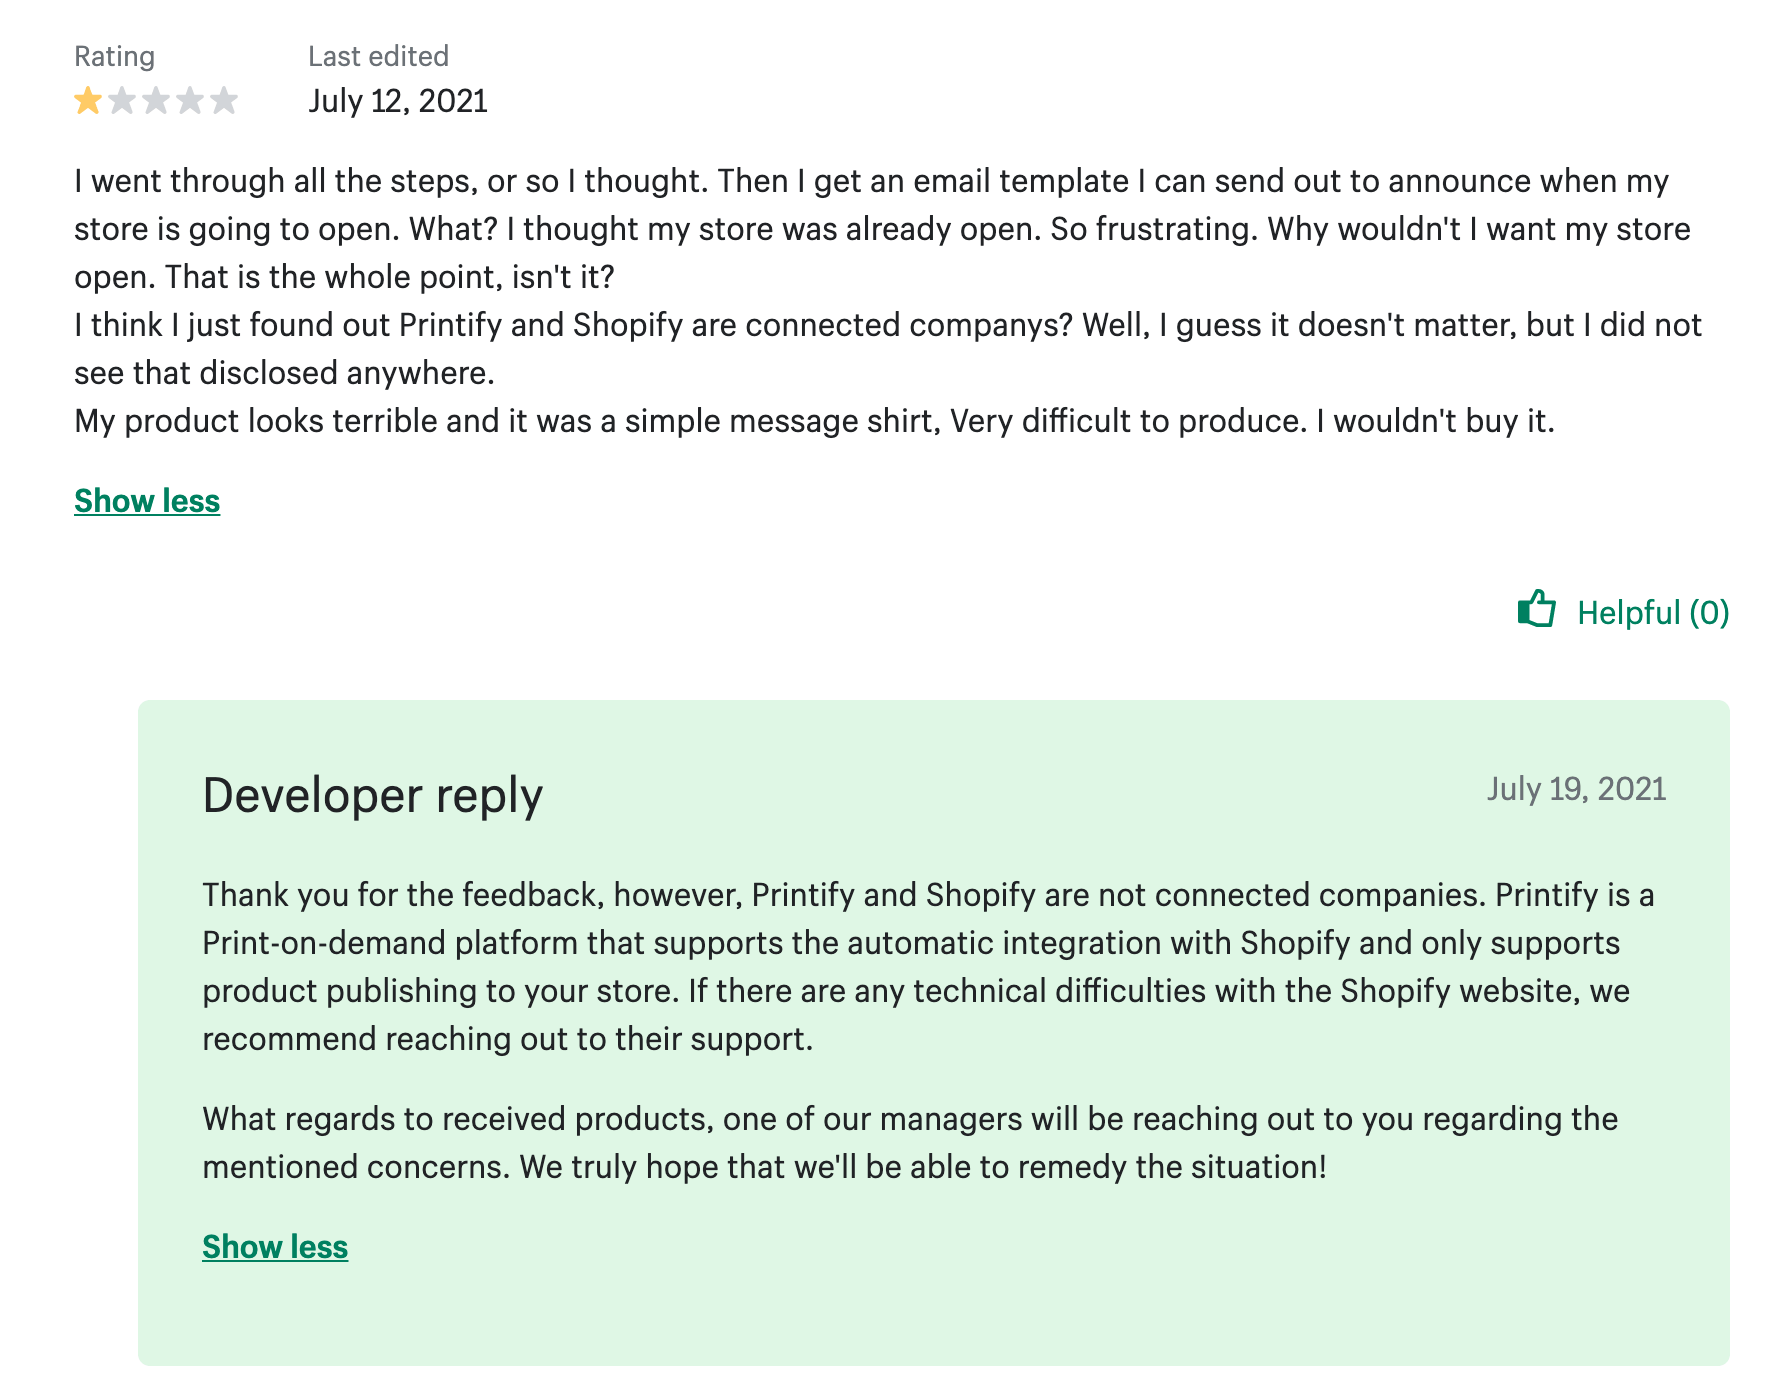 A screenshot of Shopify Developer's comprehensive response to a negative, one-star customer review.